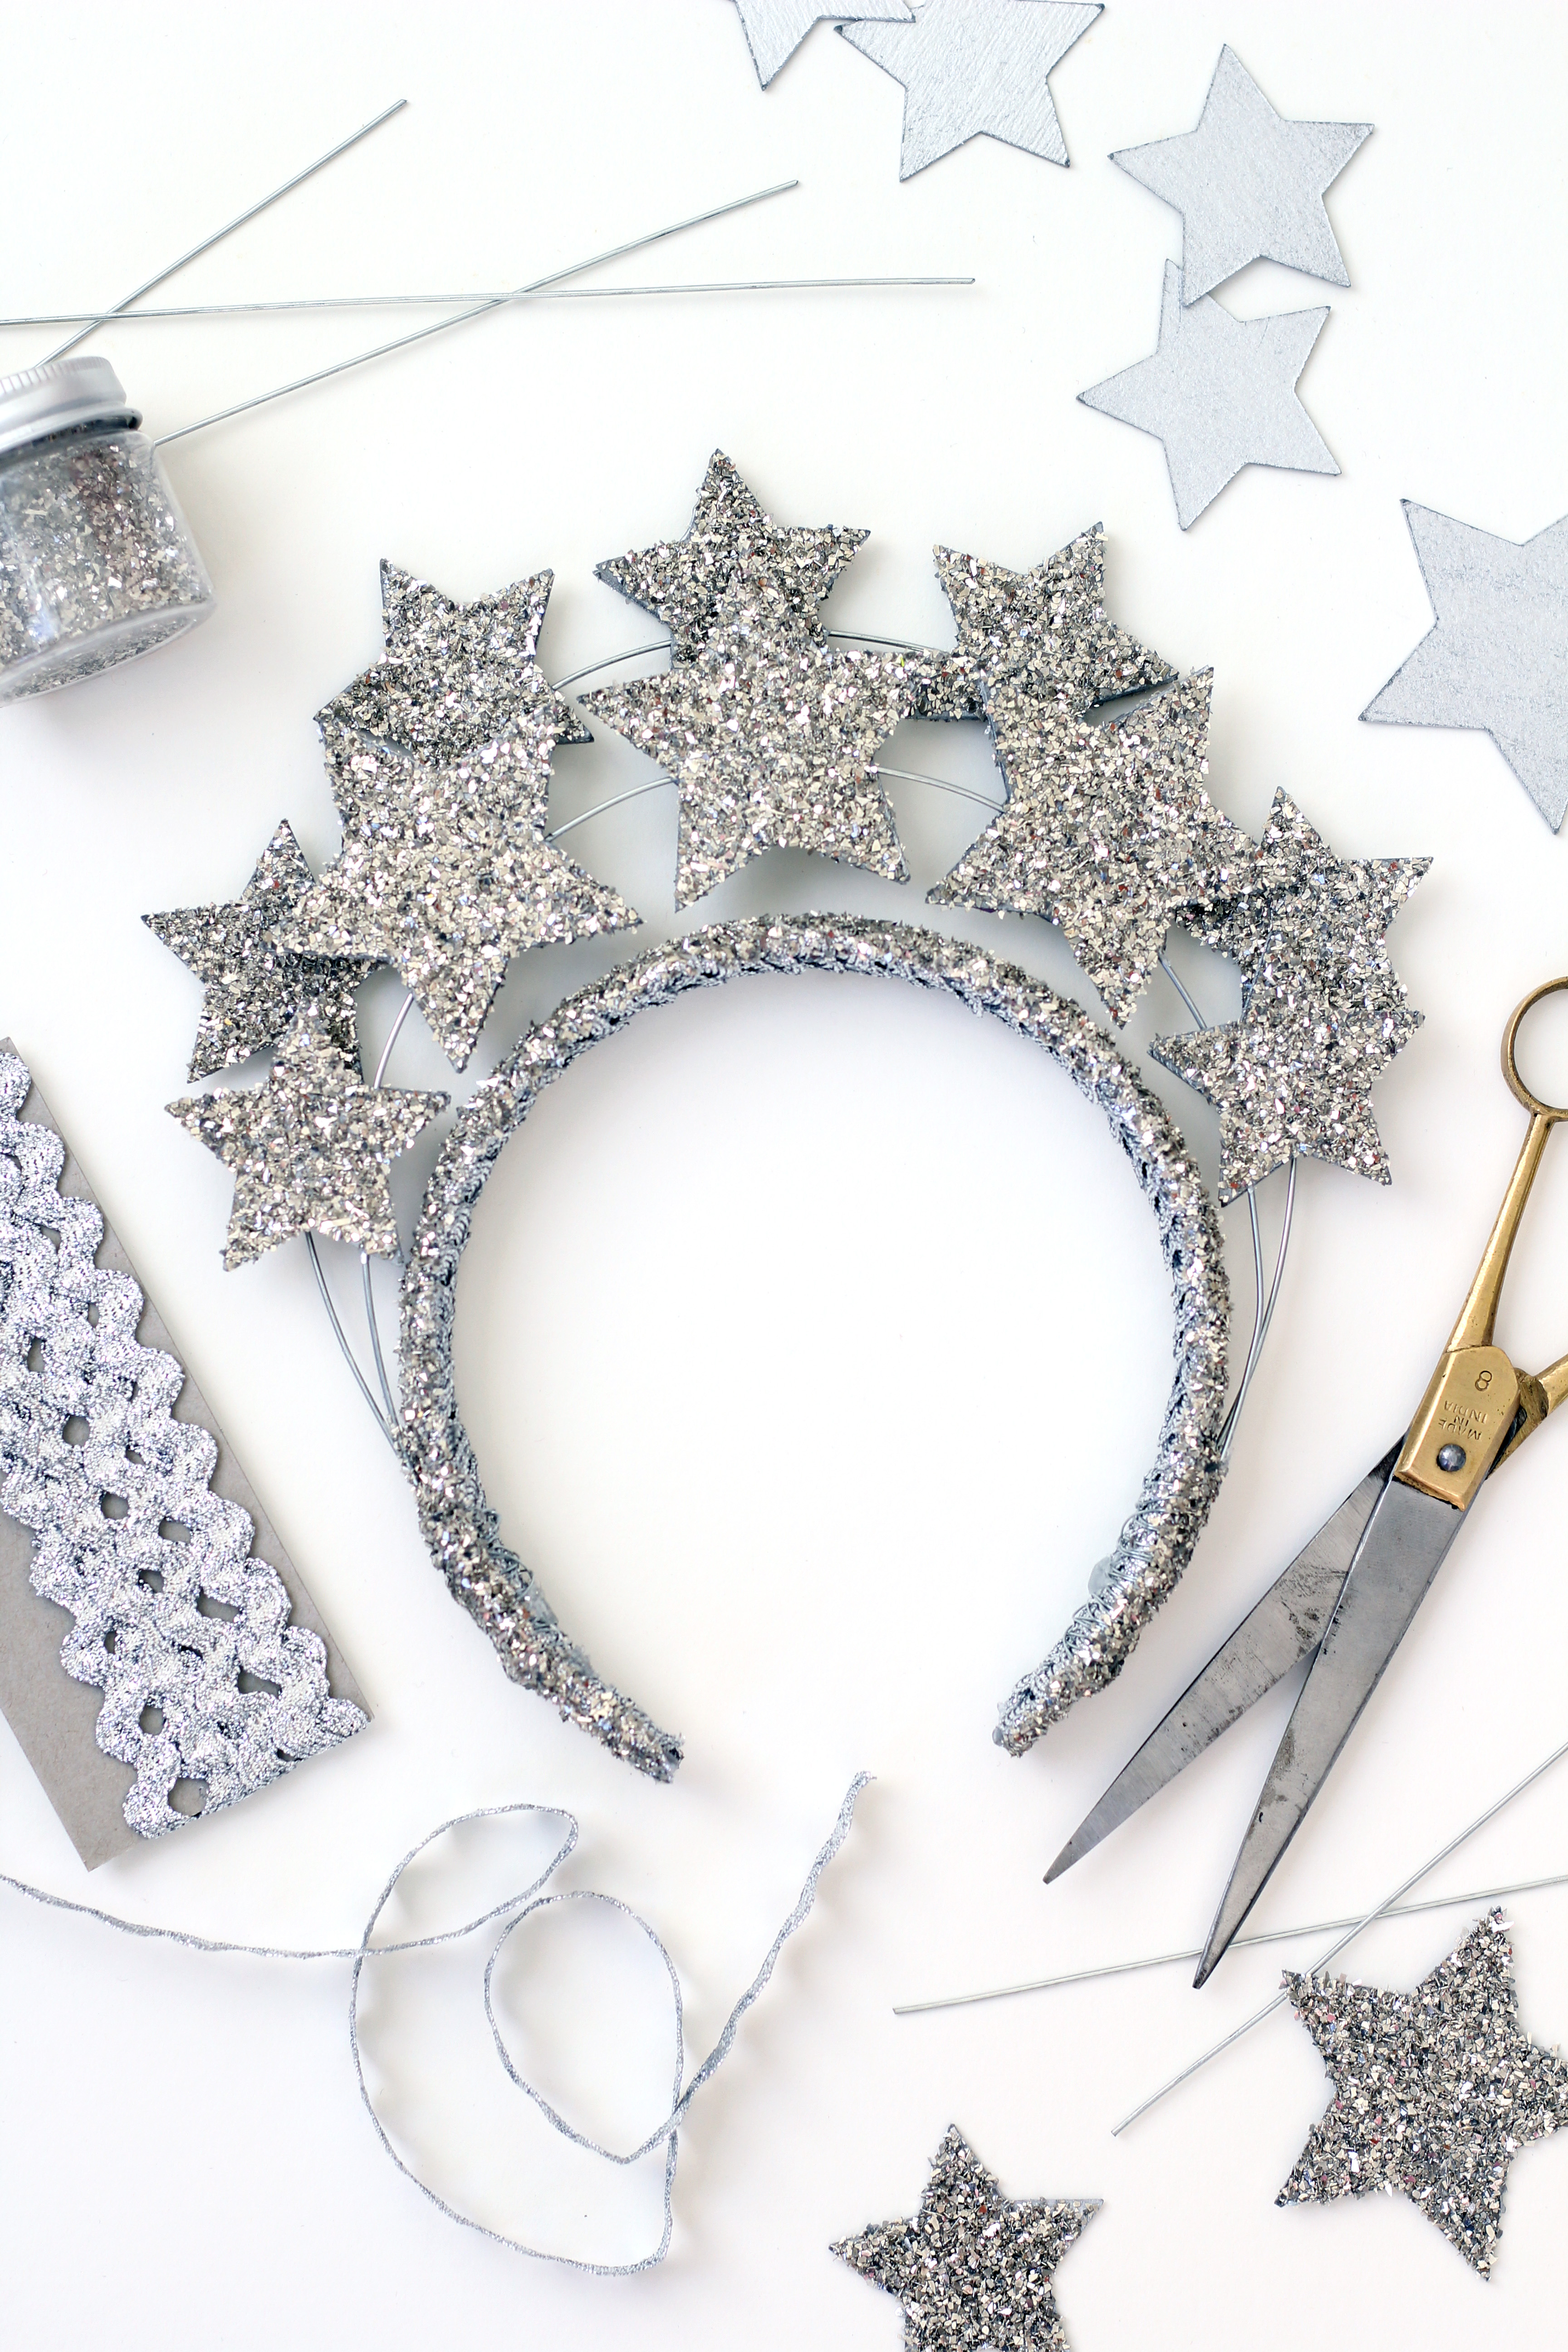 New Year’s Eve star crown